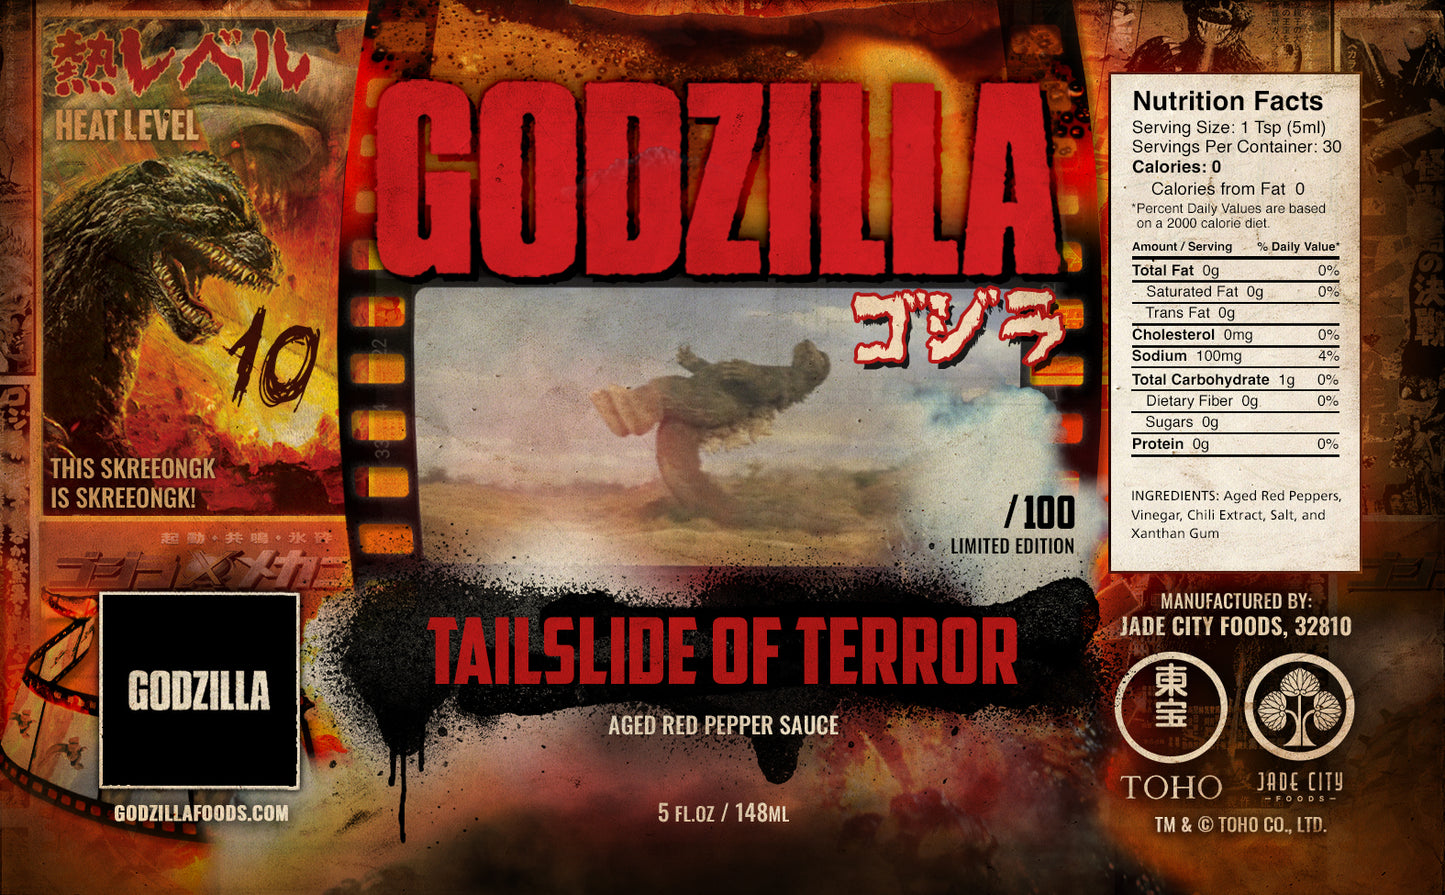 Godzilla's Tailslide of Terror: Limited Edition Aged Red Pepper Sauce